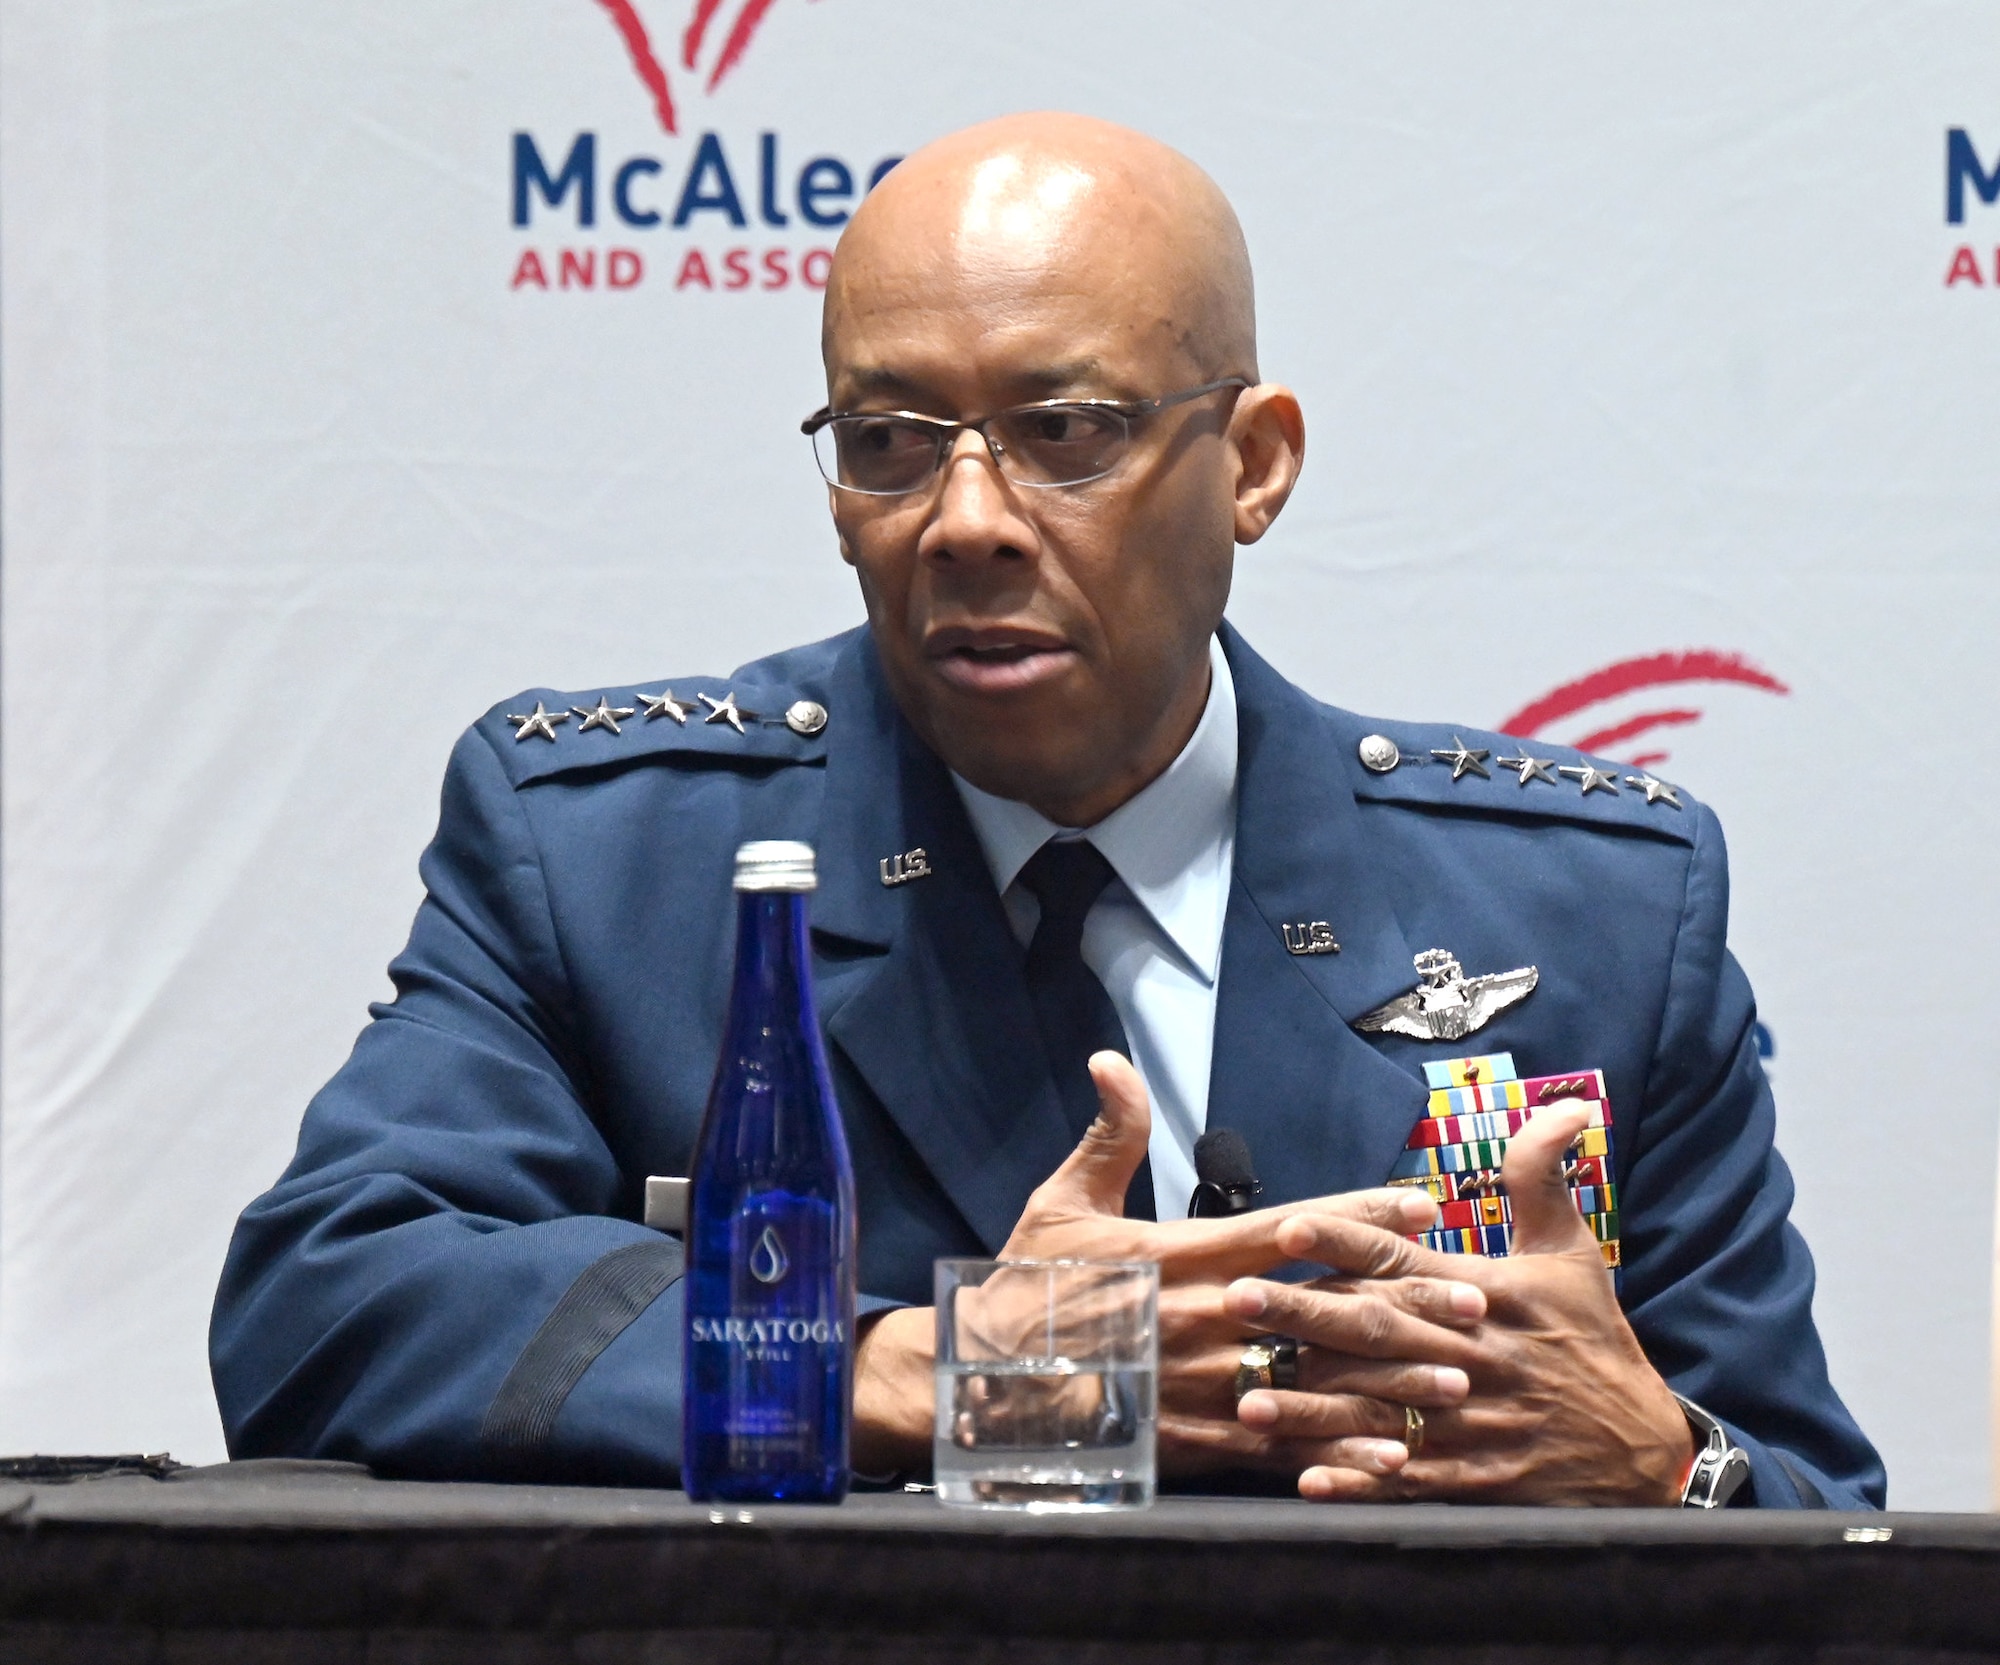 Air Force Chief of Staff Gen. CQ Brown, Jr. speaks during the McAleese Defense Program Conference at the Ronald Reagan Building and International Trade Center, Washington, D.C. March 15, 2023. (U.S. Air Force photo by Andy Morataya)